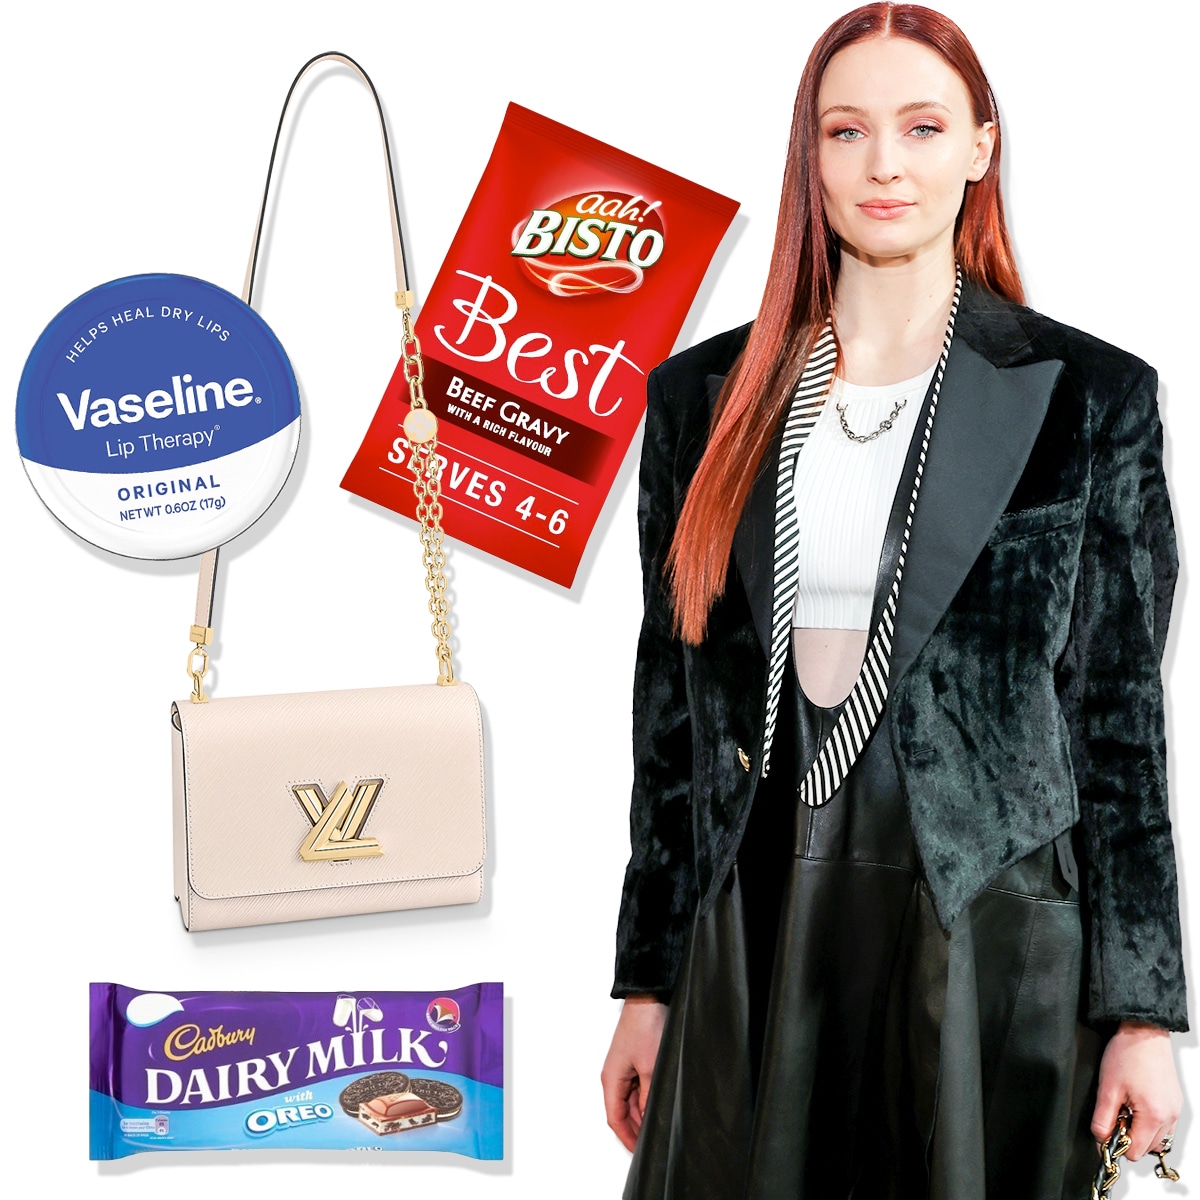 Sophie Turner Shares What's in Her Bag